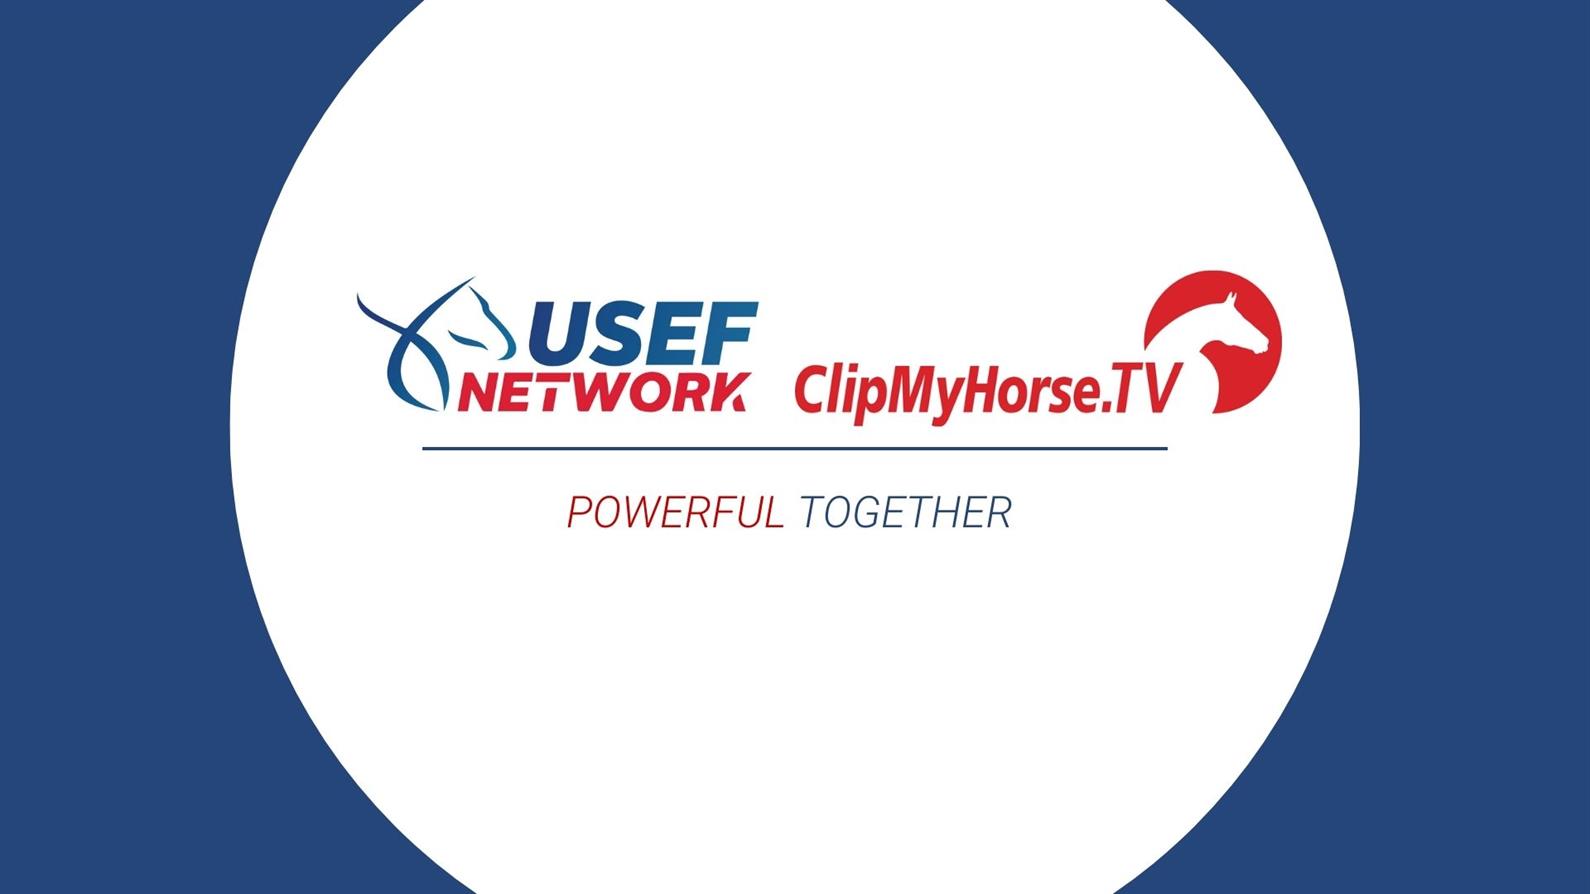 Clip My Horses Tv US Equestrian Announces Official USEF Network Partnership with ClipMyHorse. TV | US Equestrian